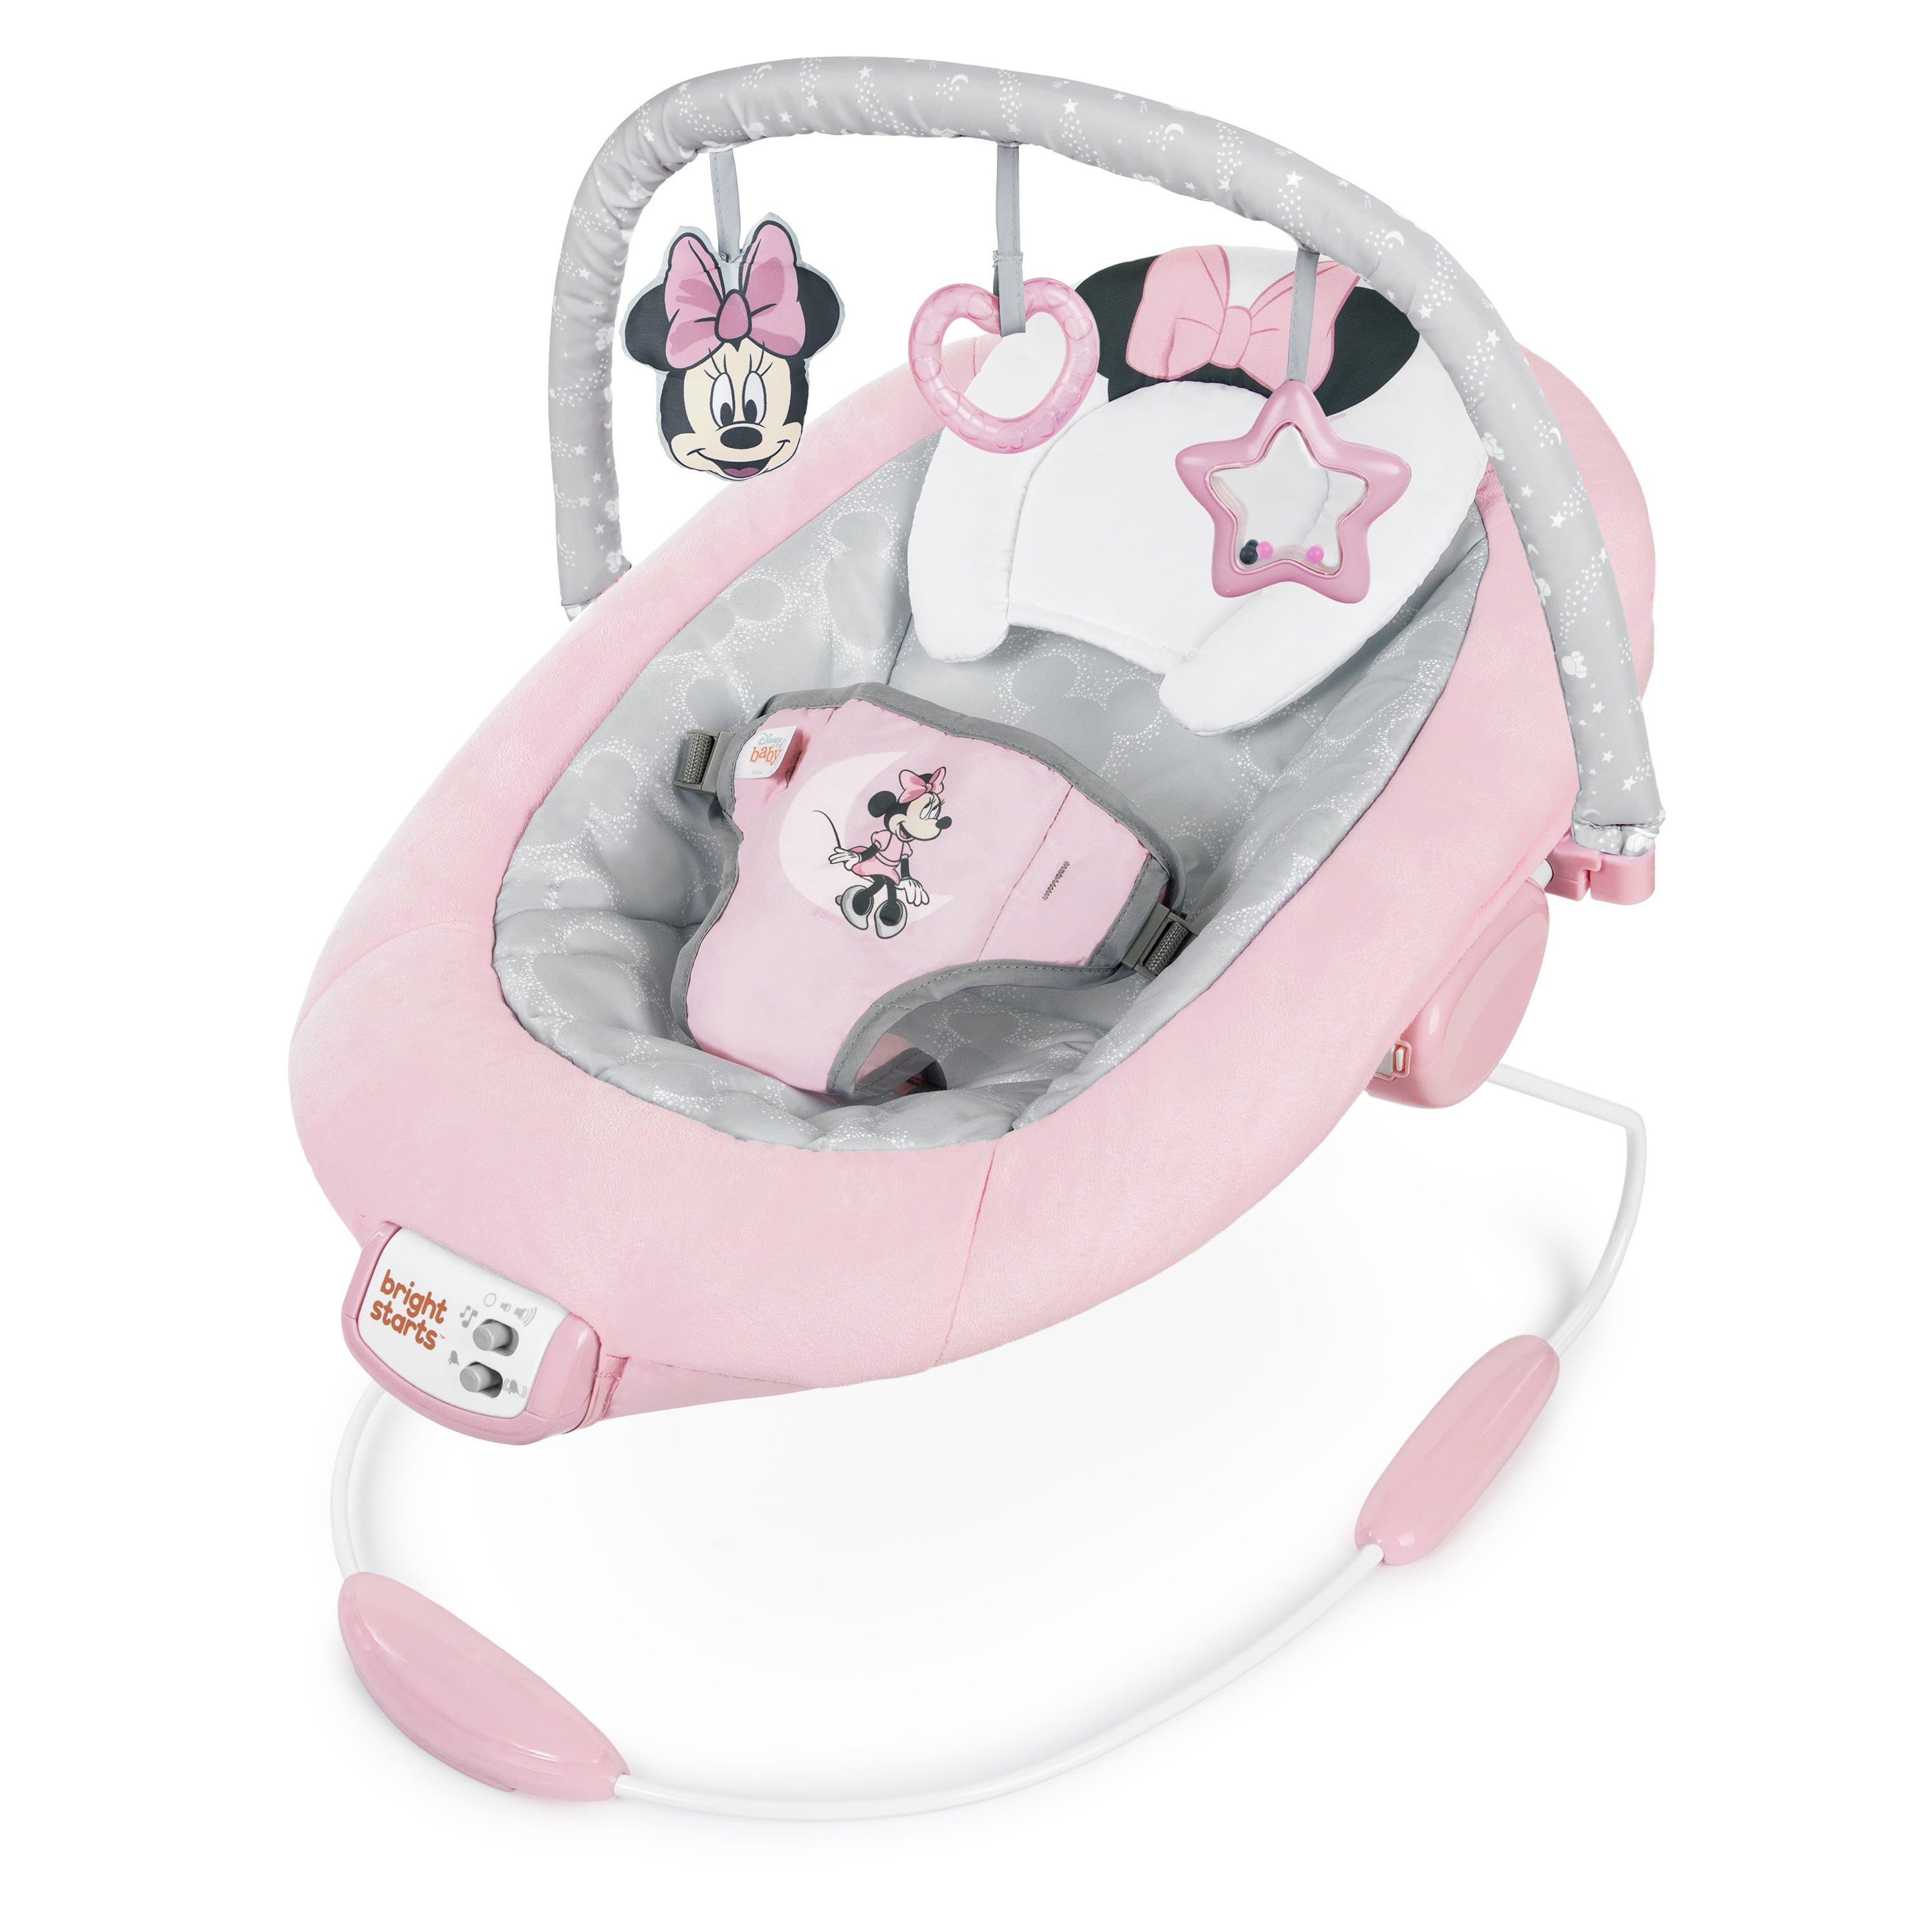 grey and pink bouncer